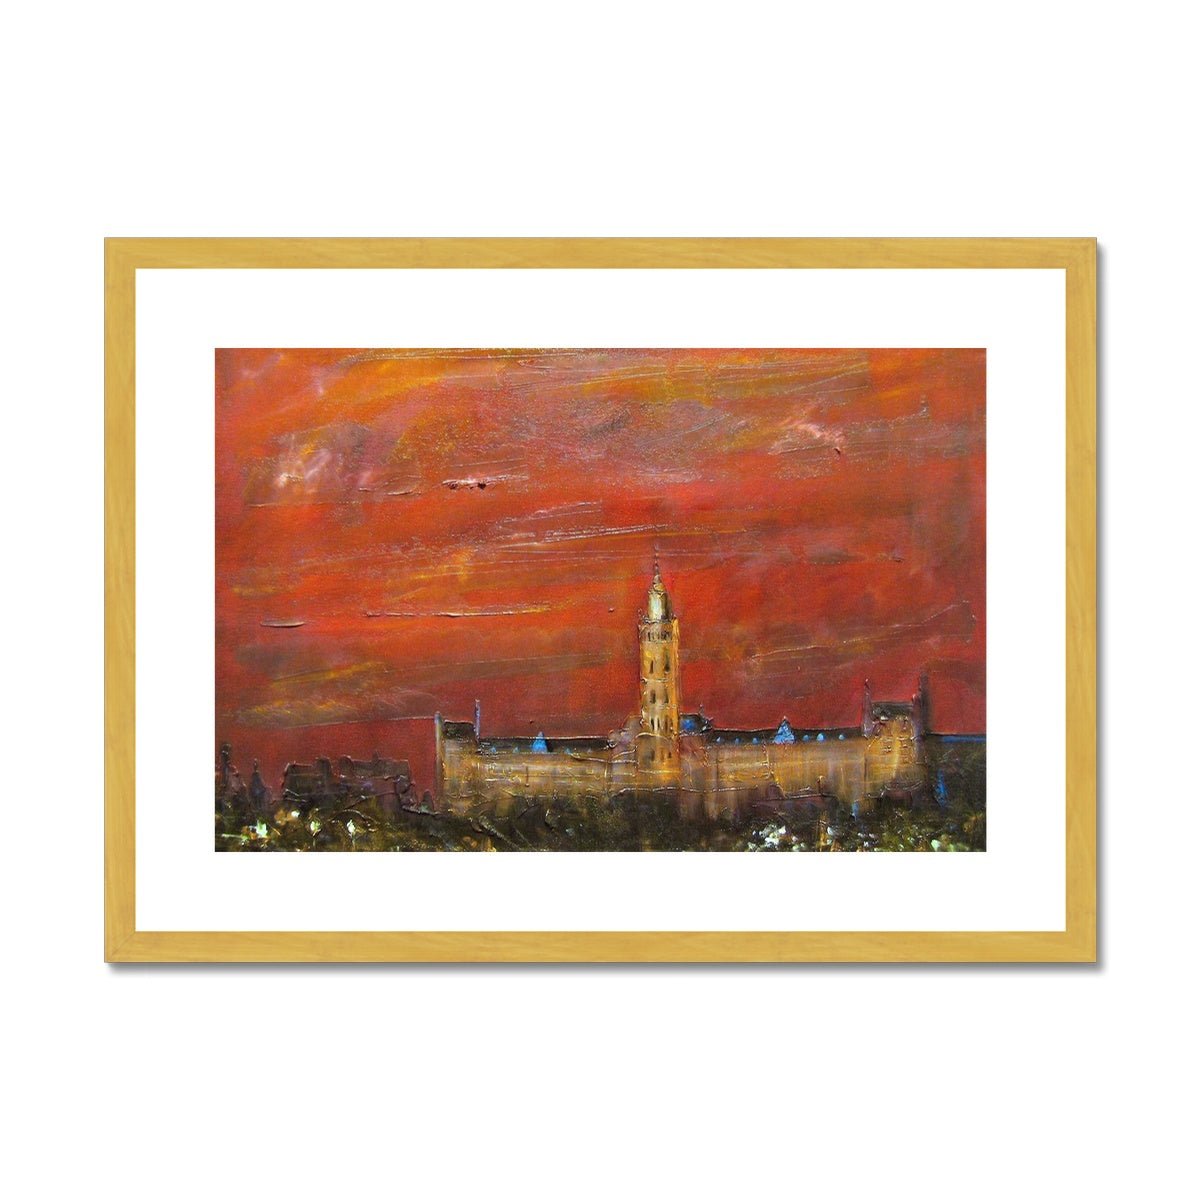 Glasgow University Dusk Painting | Antique Framed & Mounted Prints From Scotland-Antique Framed & Mounted Prints-Edinburgh & Glasgow Art Gallery-A2 Landscape-Gold Frame-Paintings, Prints, Homeware, Art Gifts From Scotland By Scottish Artist Kevin Hunter